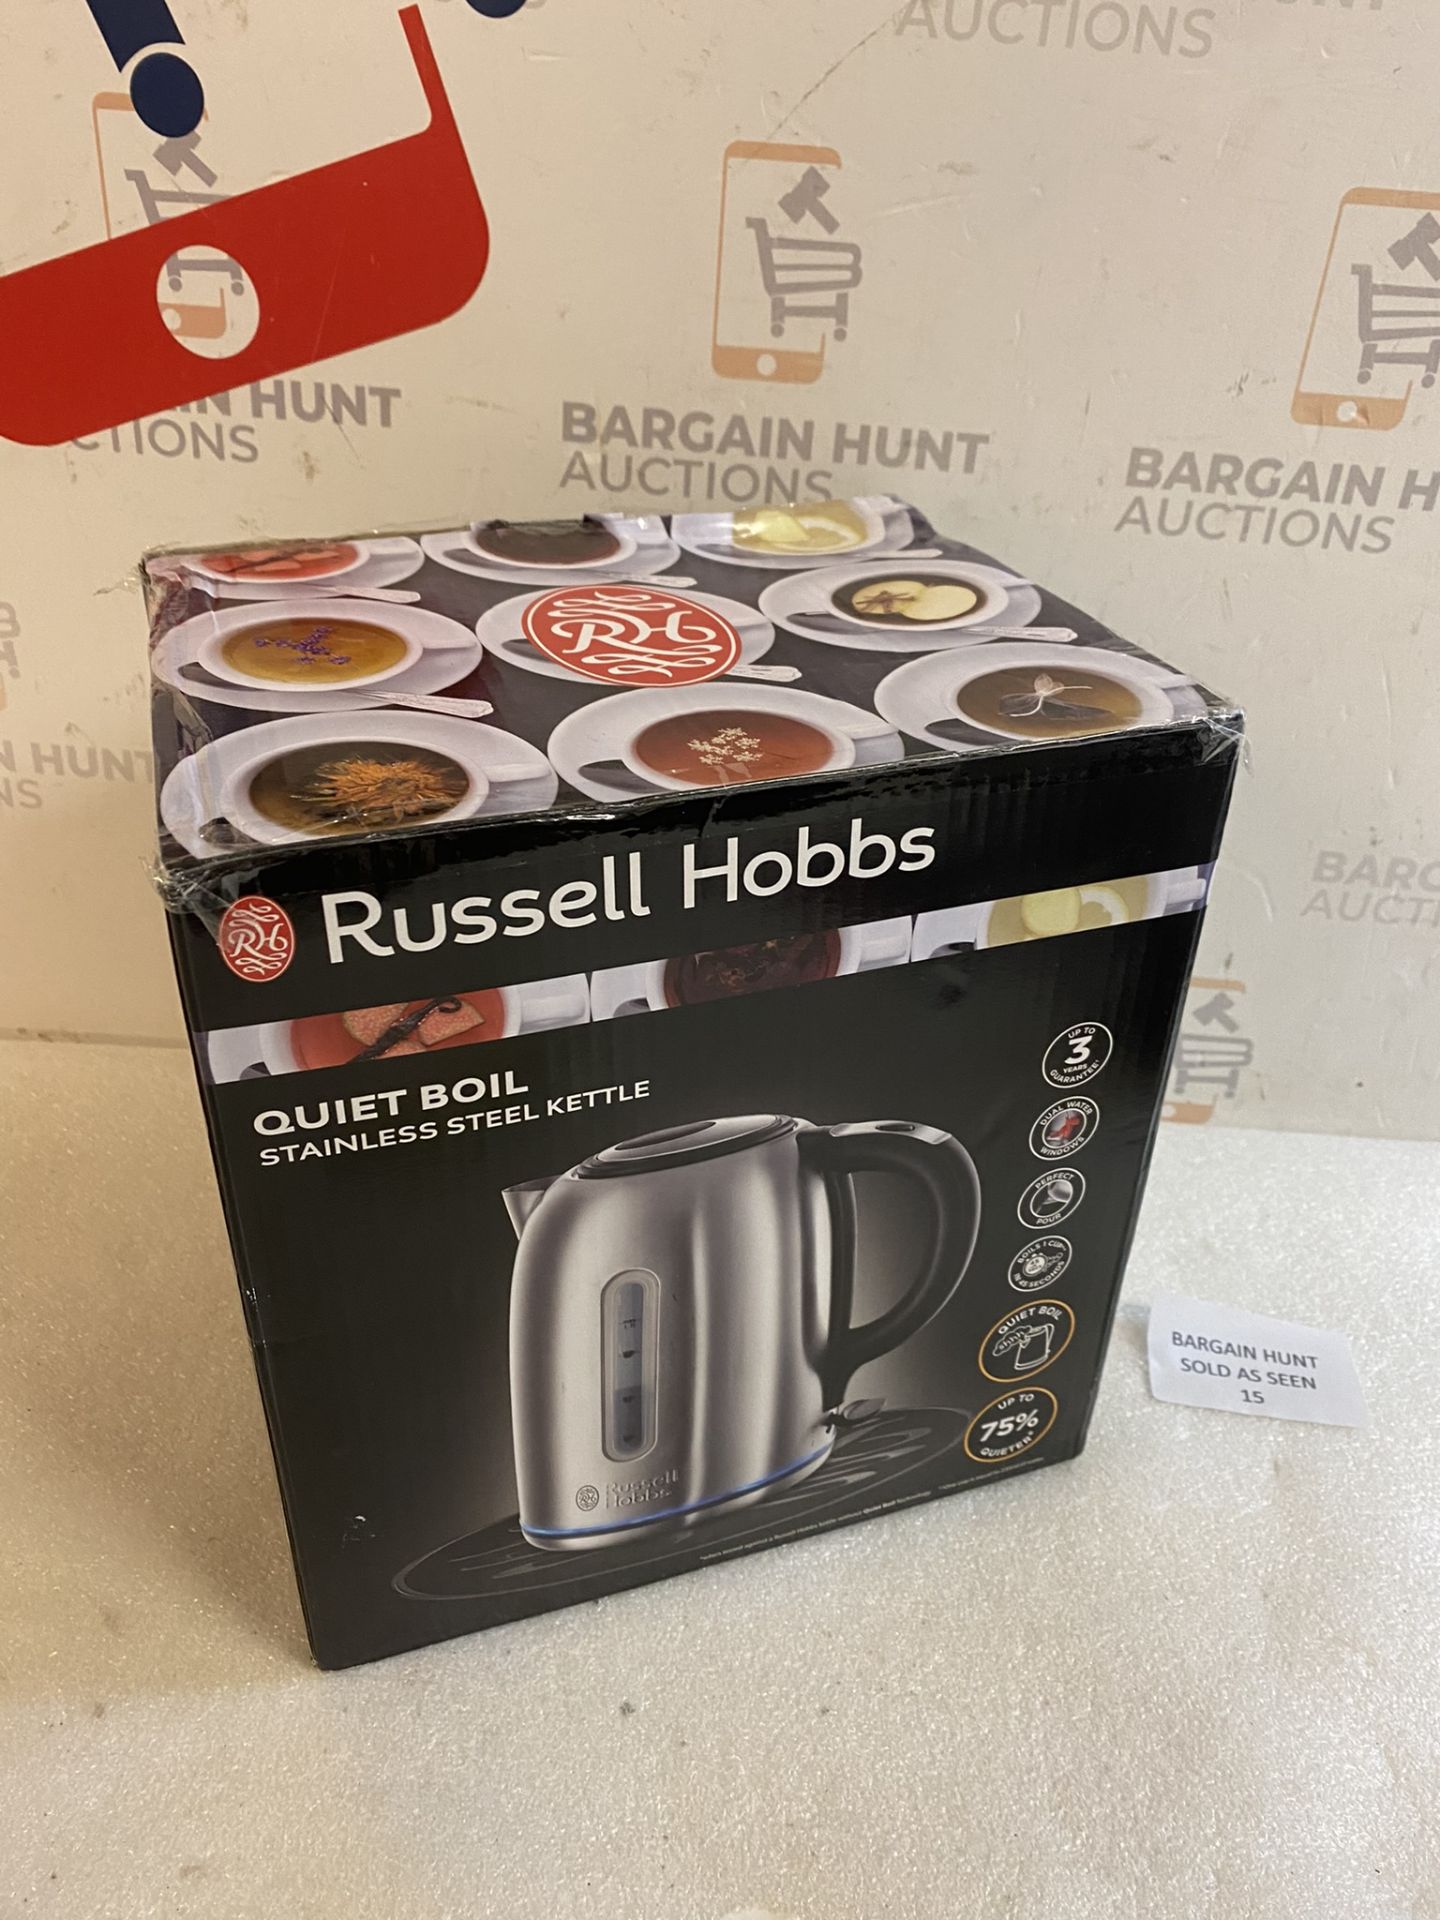 Russell Hobbs 20460 Quiet Boil Brushed Stainless Steel Kettle RRP £31.99